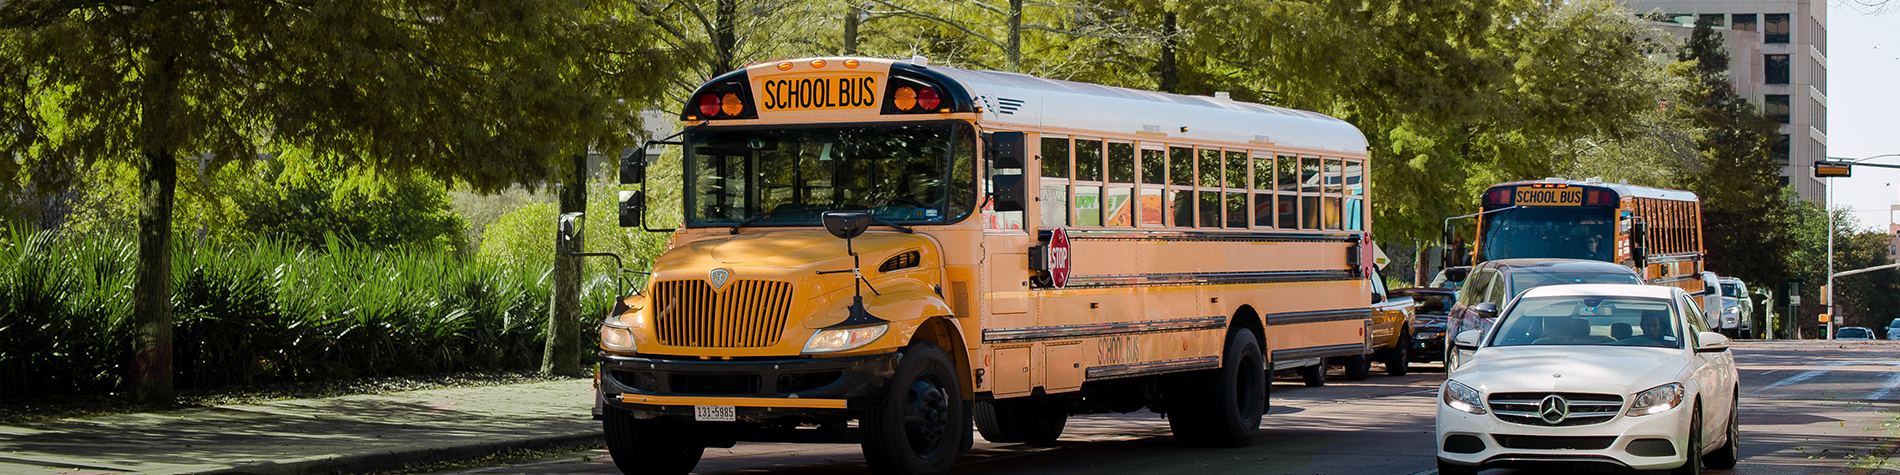 <p class="slider-title">2023-24 Transportation Service Levels and Fees | Apply by June 11</p><div class="banner-line"></div><p class="slider-subtitle">Families must register by June 11 to be  to routes of the start of the next school year.</p> <a style="pointer-events:all" class=AEBannerMoreLink href="https://cbe.ab.ca/news-centre/Pages/2023-24-transportation-service-levels-and-fees.aspx">Read More</a>